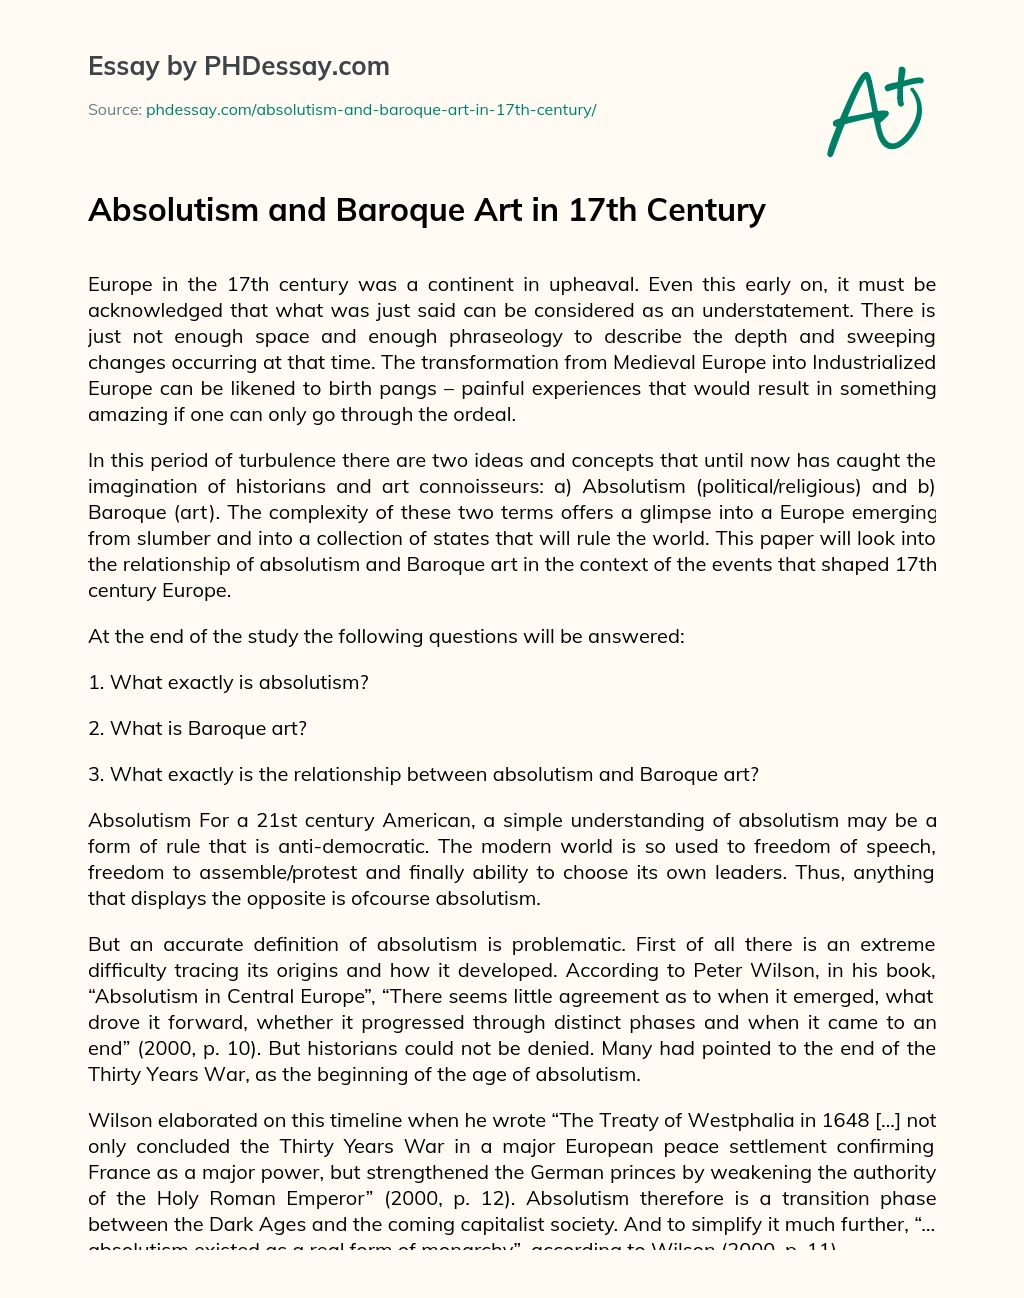 Absolutism and Baroque Art in 17th Century essay